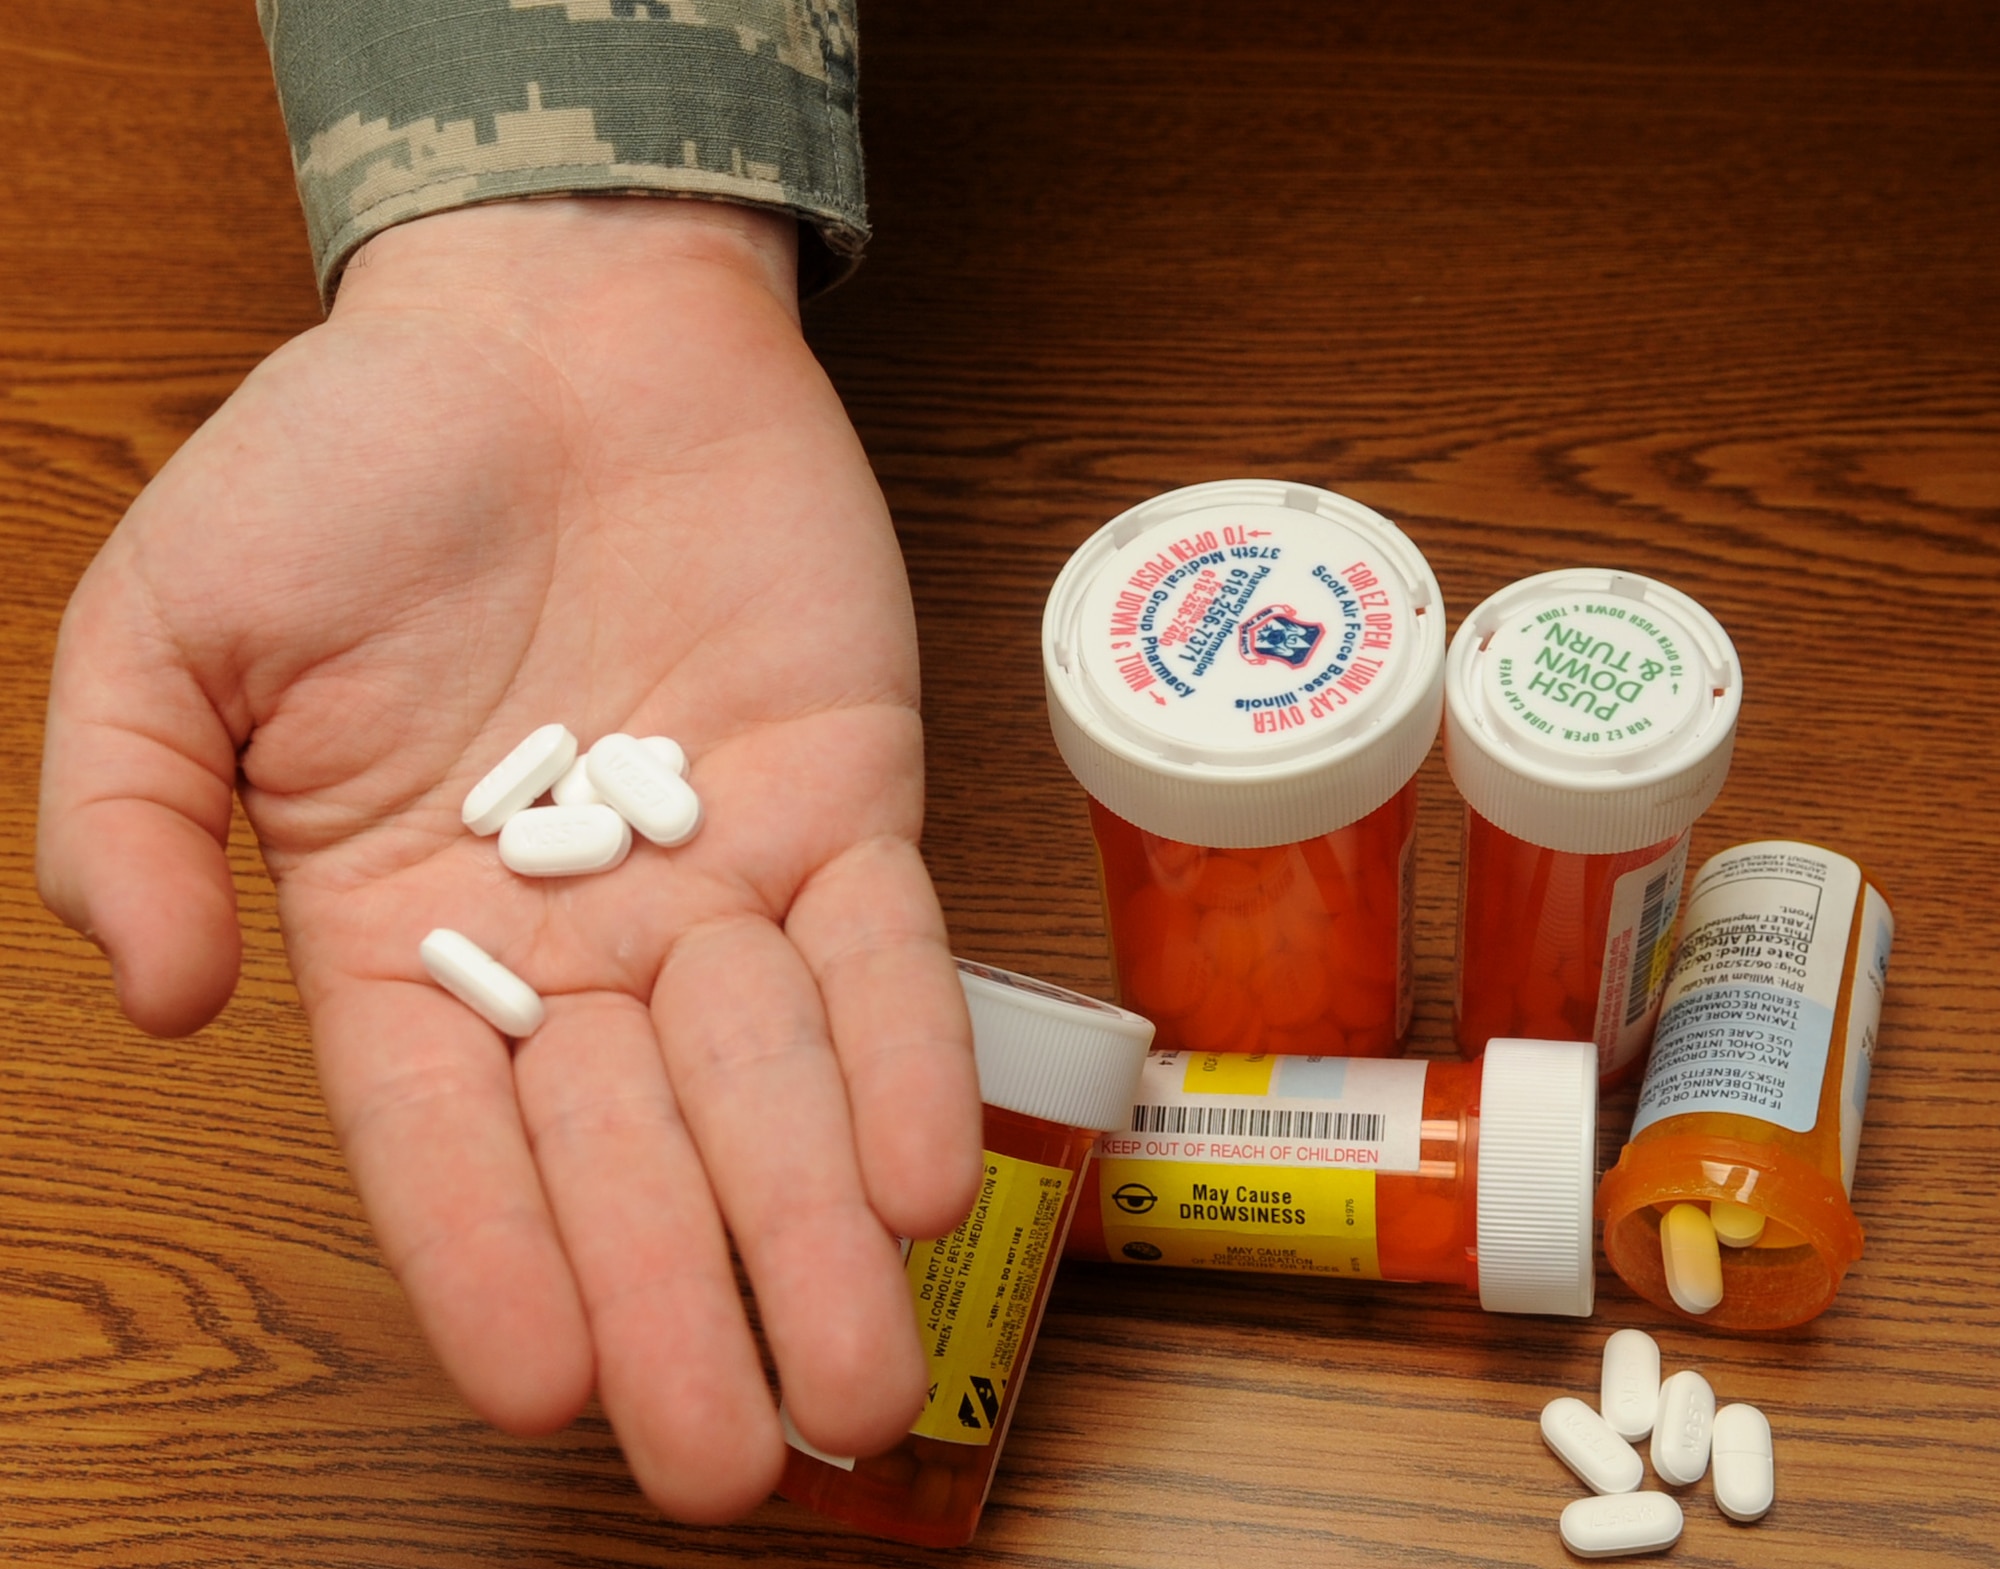 The 2nd Security Forces Squadron will be participating in the Drug Enforcement Administration's National Prescription Drug Take-Back Aprilo 24 and April 27 from 10 a.m. to 2 p.m. at the Base Exchange. The non-medical use of prescription drugs ranks second as the most common form of drug abuse in the U.S. Team Barksdale members are encouraged to bring in unused or expired medications for safe disposal. (U.S. Air Force photo illustration/Senior Airman Kristin High)(RELEASED)
